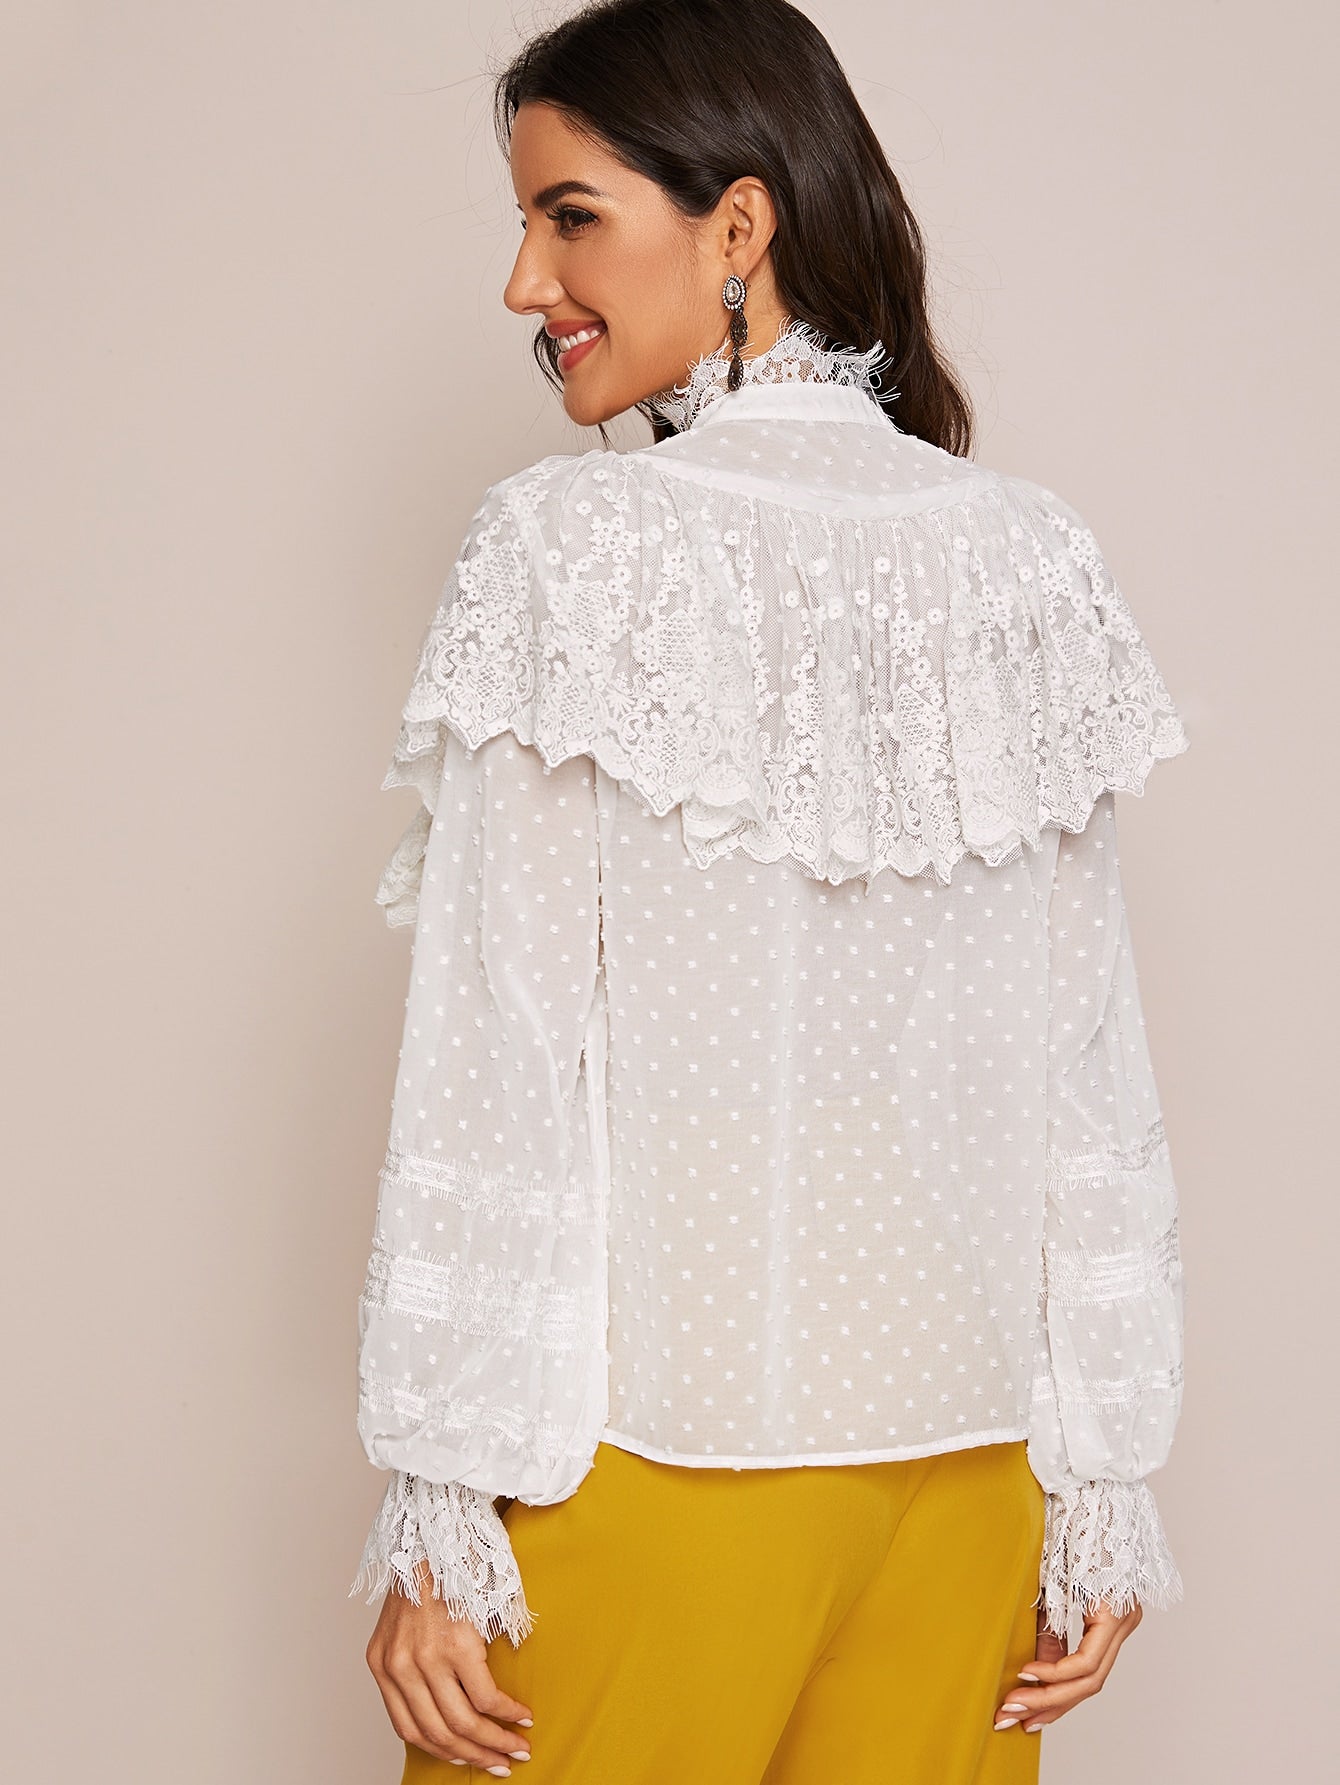 Eyelash Lace and Embroidered Mesh Panel Blouse